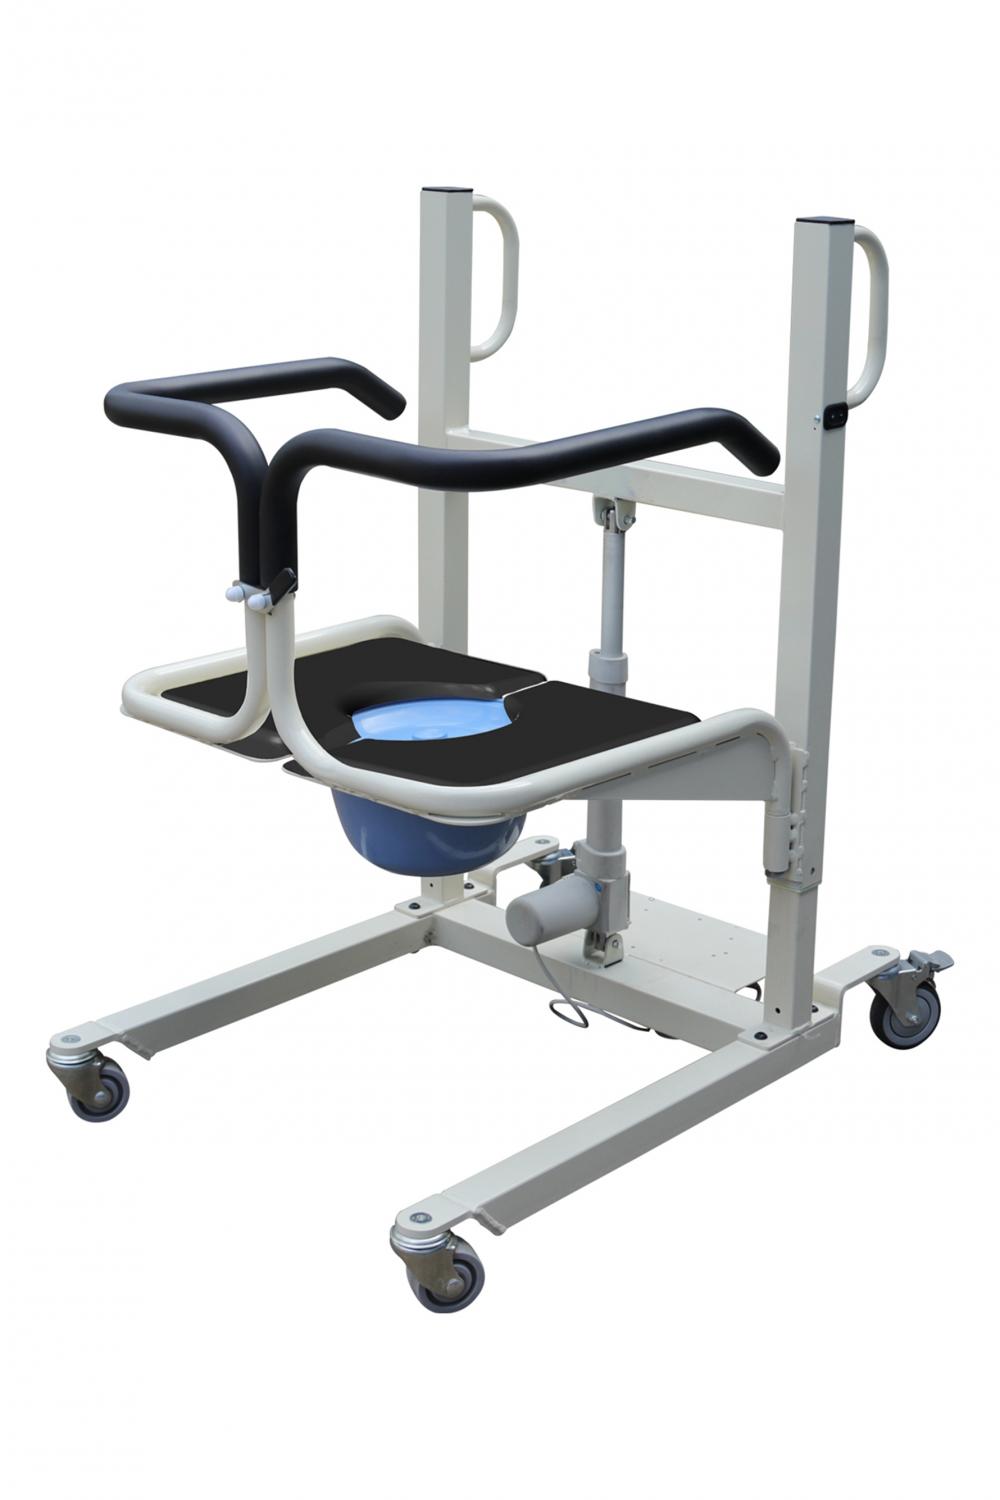 Powered Patient Lifting Devices for Home Use